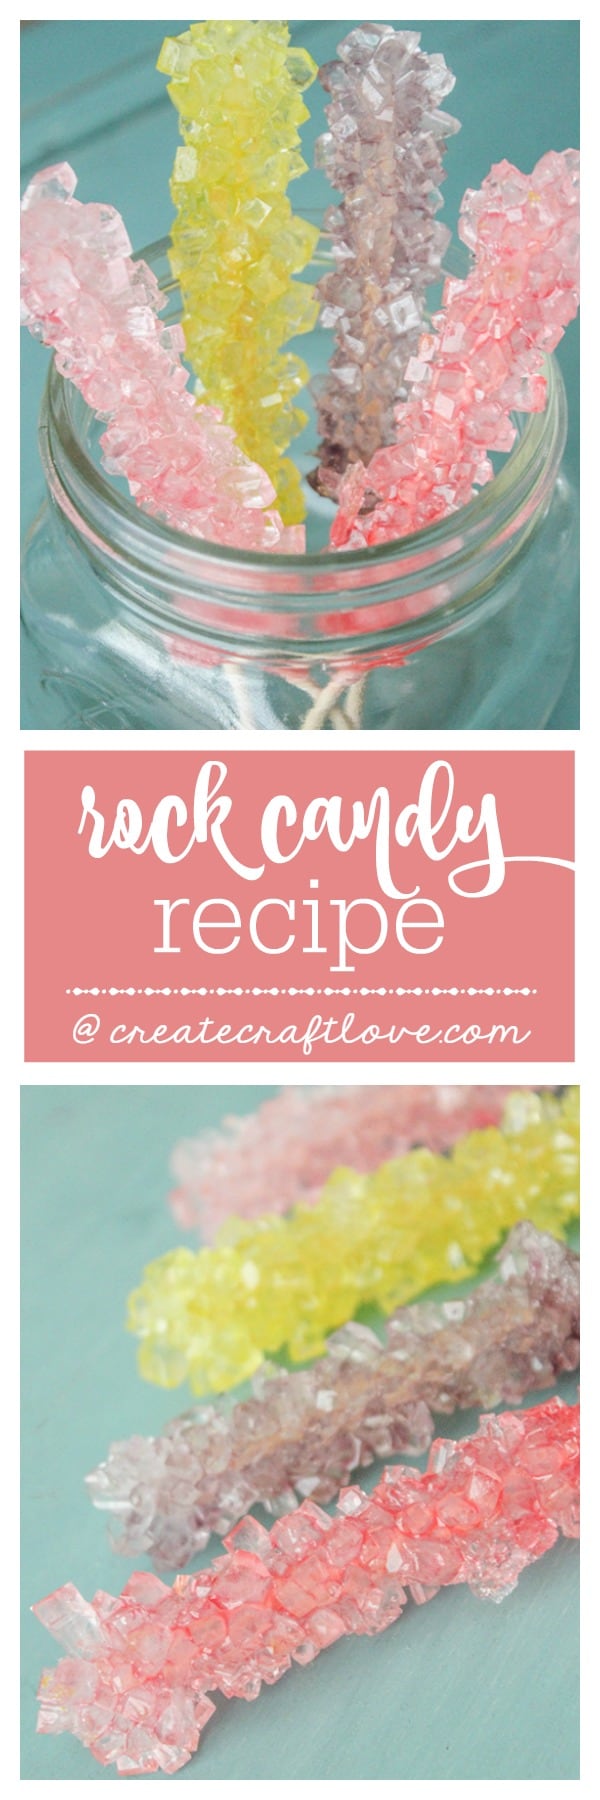 This recipe for rock candy is fun for kids to make!